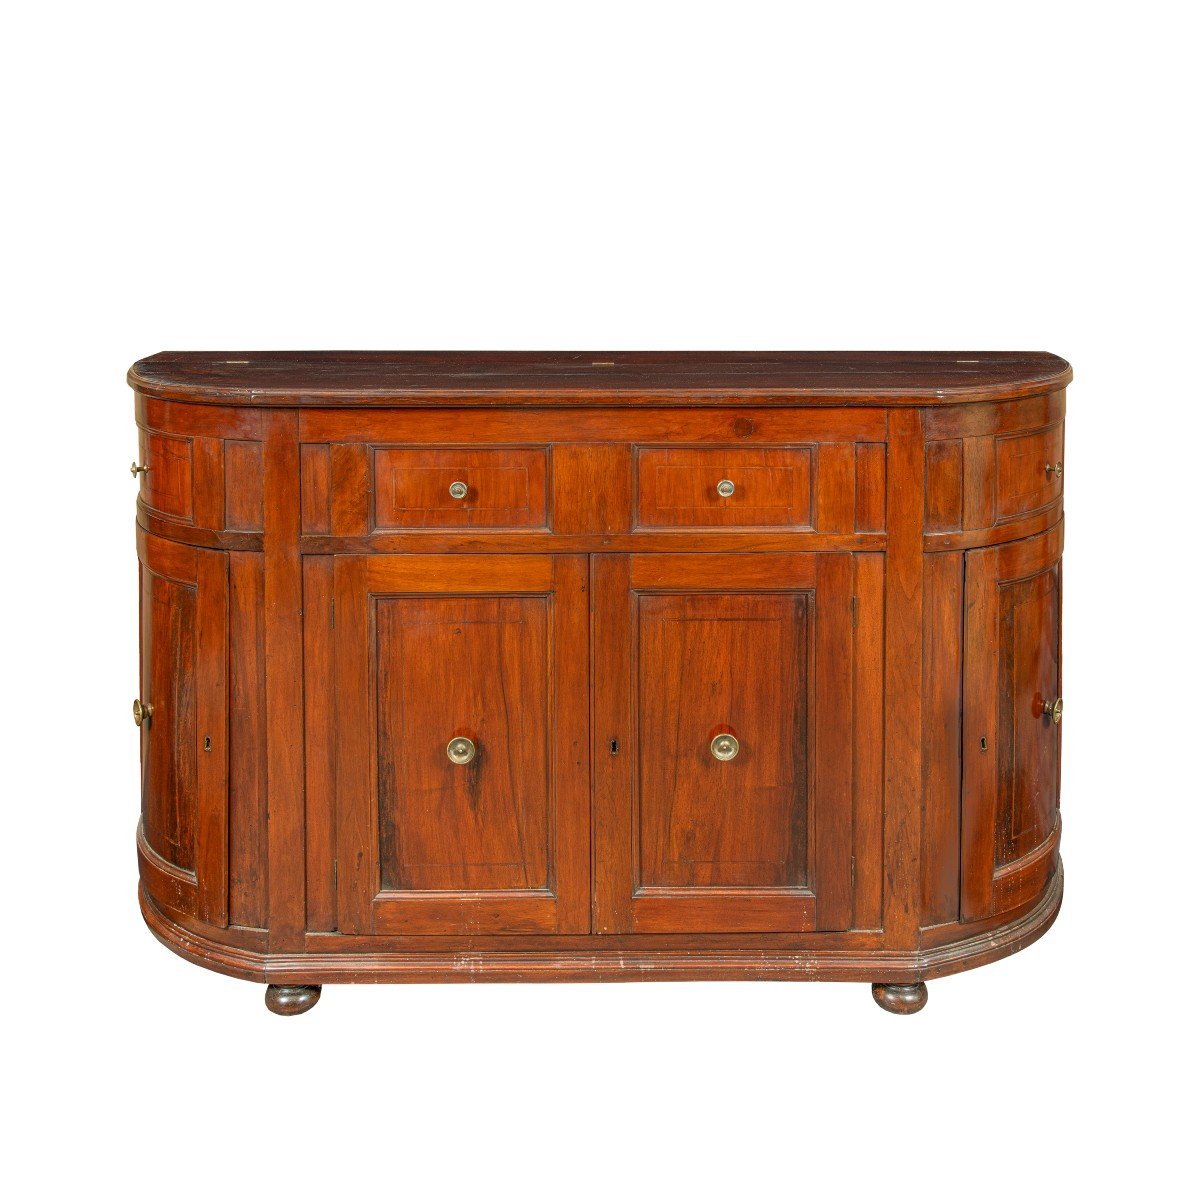 Sideboard In Solid Cherry Wood. Veneto, 18th-19th Century.